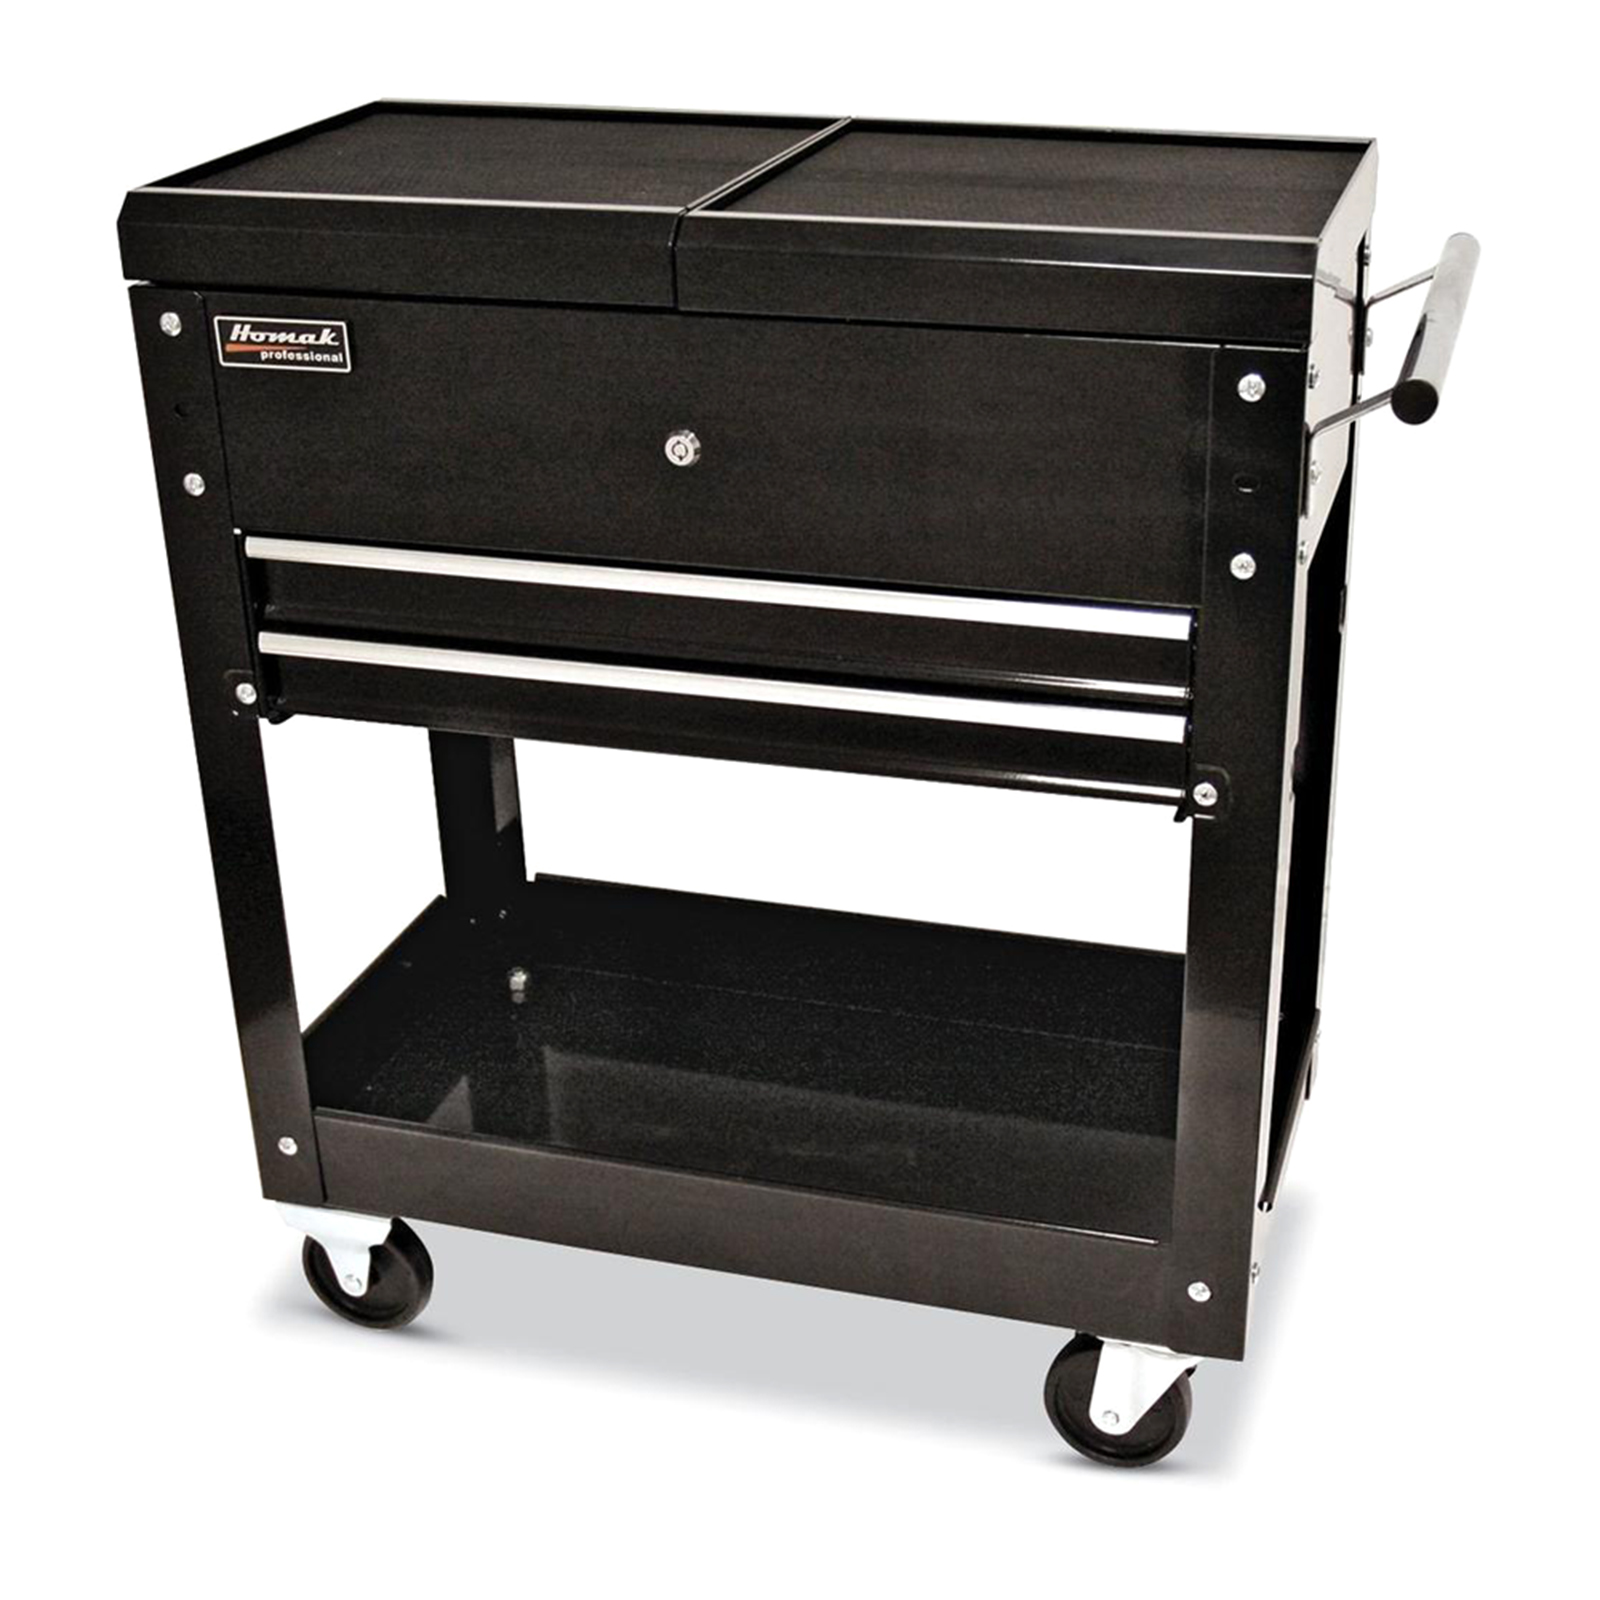 Homak Pro Series 27" Portable Tool Cart with 2 Drawers - Black